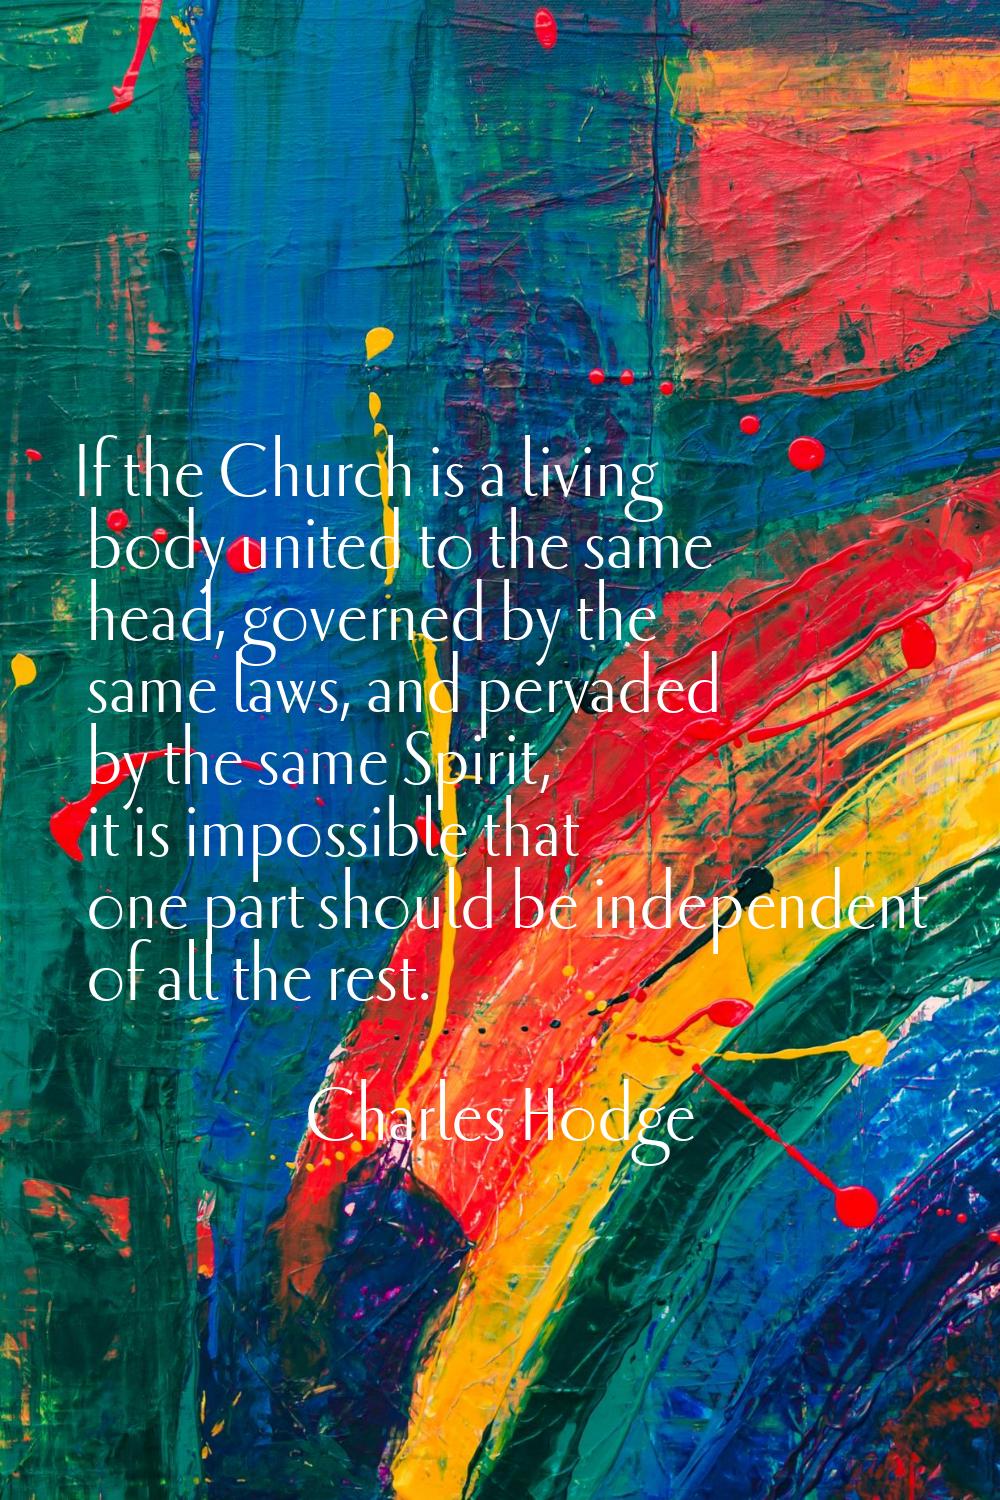 If the Church is a living body united to the same head, governed by the same laws, and pervaded by 